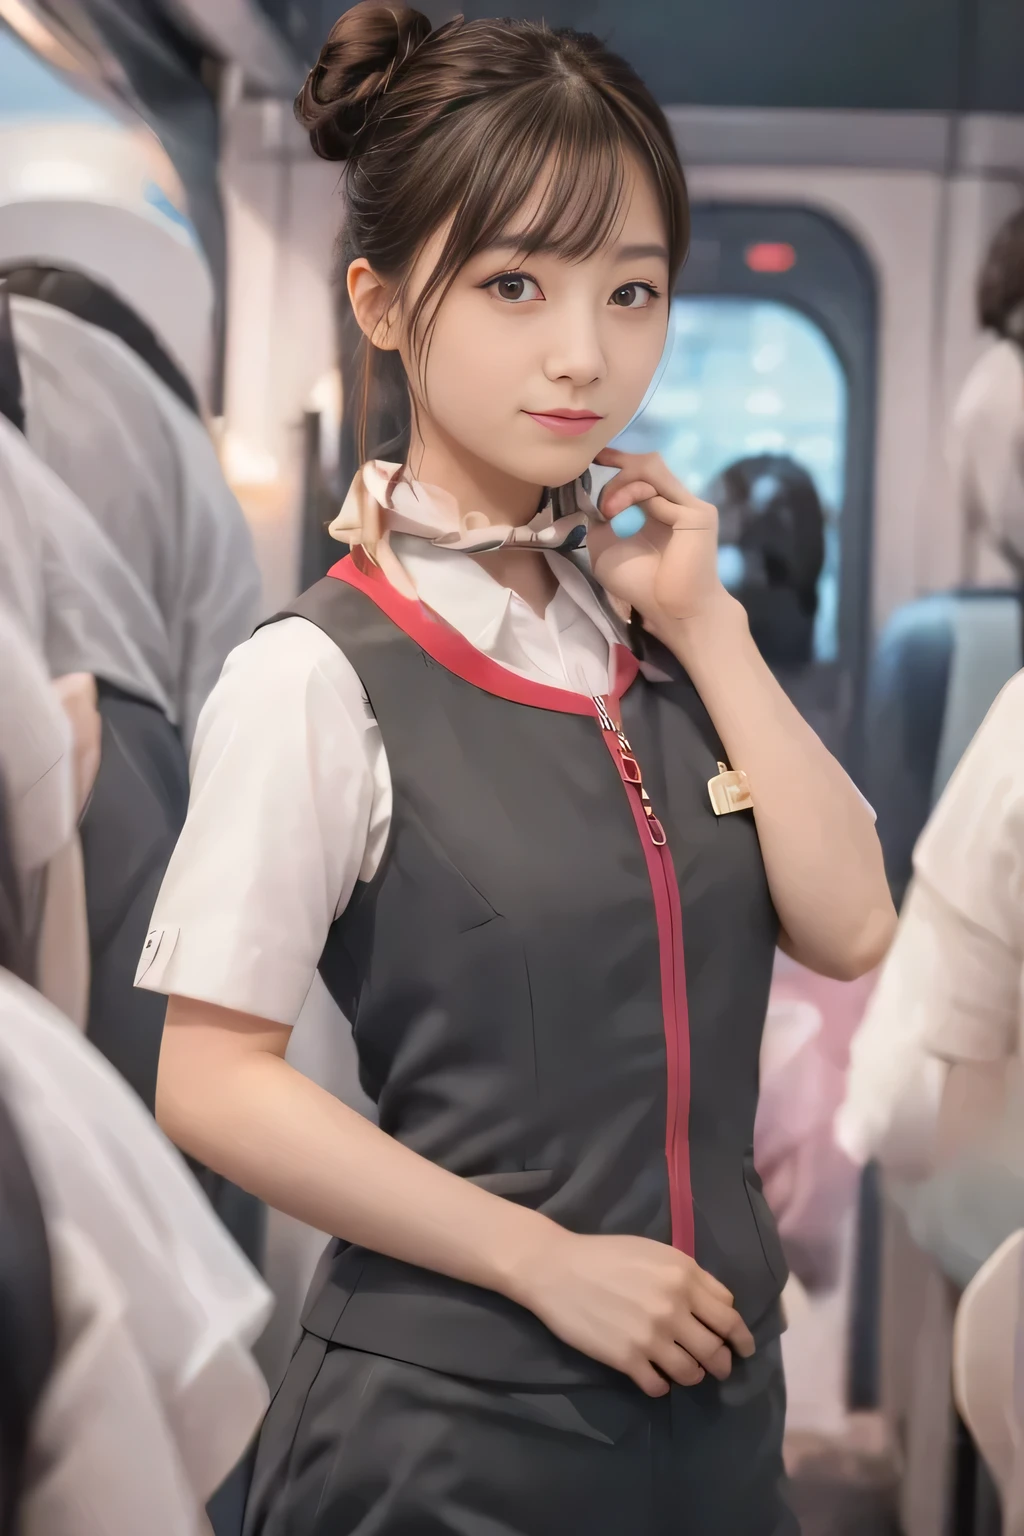 (masterpiece:1.2, highest quality:1.2), 32K HDR, High resolution, (alone、1 girl)、（Take the Shinkansen、Professional Lighting）、Background in the car、（Realistic style of JR Gran Class crew wearing uniform）、Short sleeve blouse、a scarf around the neck、（JR Gran Class flight attendant uniform with pink parts on the skirt sleeves）、（JR Gran Class flight attendant uniform with pink line on front zipper of vest）、Dark brown hair、（Hair tied up、Hair Bun、Hair Bun）、Dark brown hair、Long Shot、Big Breasts、（（Great hands：2.0）），（（Harmonious body proportions：1.5）），（（Normal limbs：2.0）），（（Normal finger：2.0）），（（Delicate eyes：2.0）），（（Normal eyes：2.0））)、Luxury Necklace、Captivating look、Beautiful standing posture,